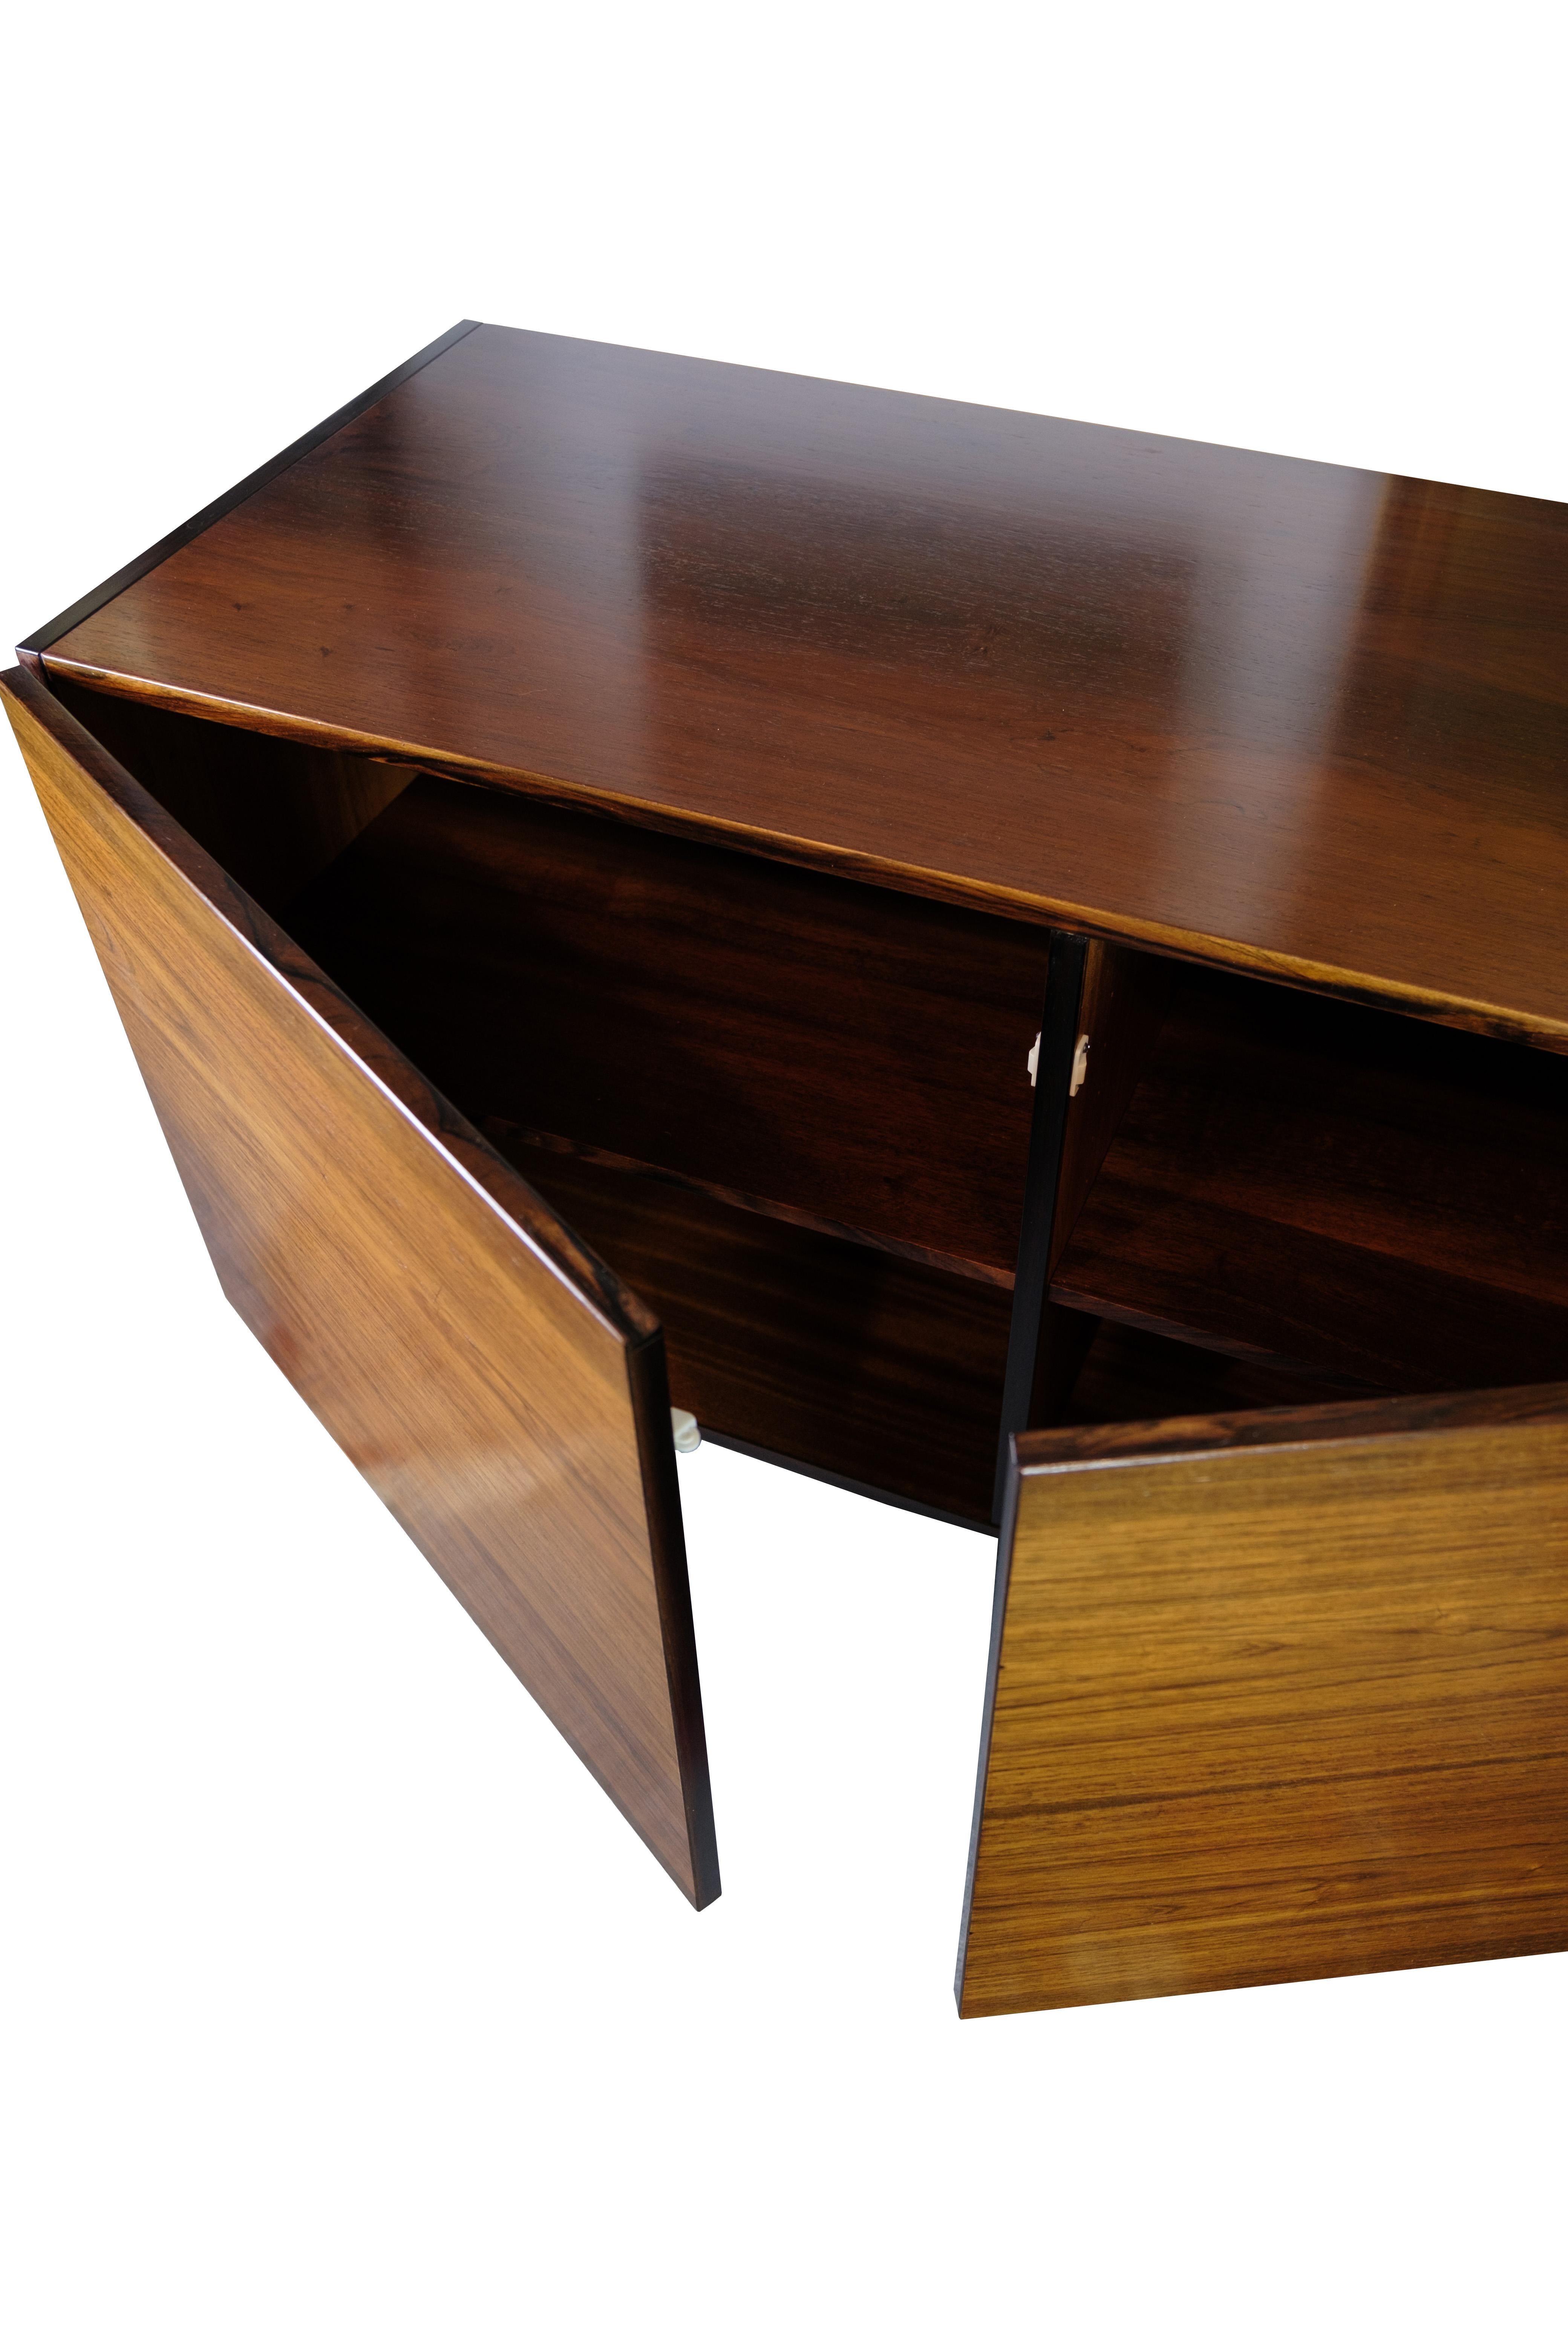 Mid-Century Modern Sideboard Made In Rosewood Danish Design From 1960s For Sale